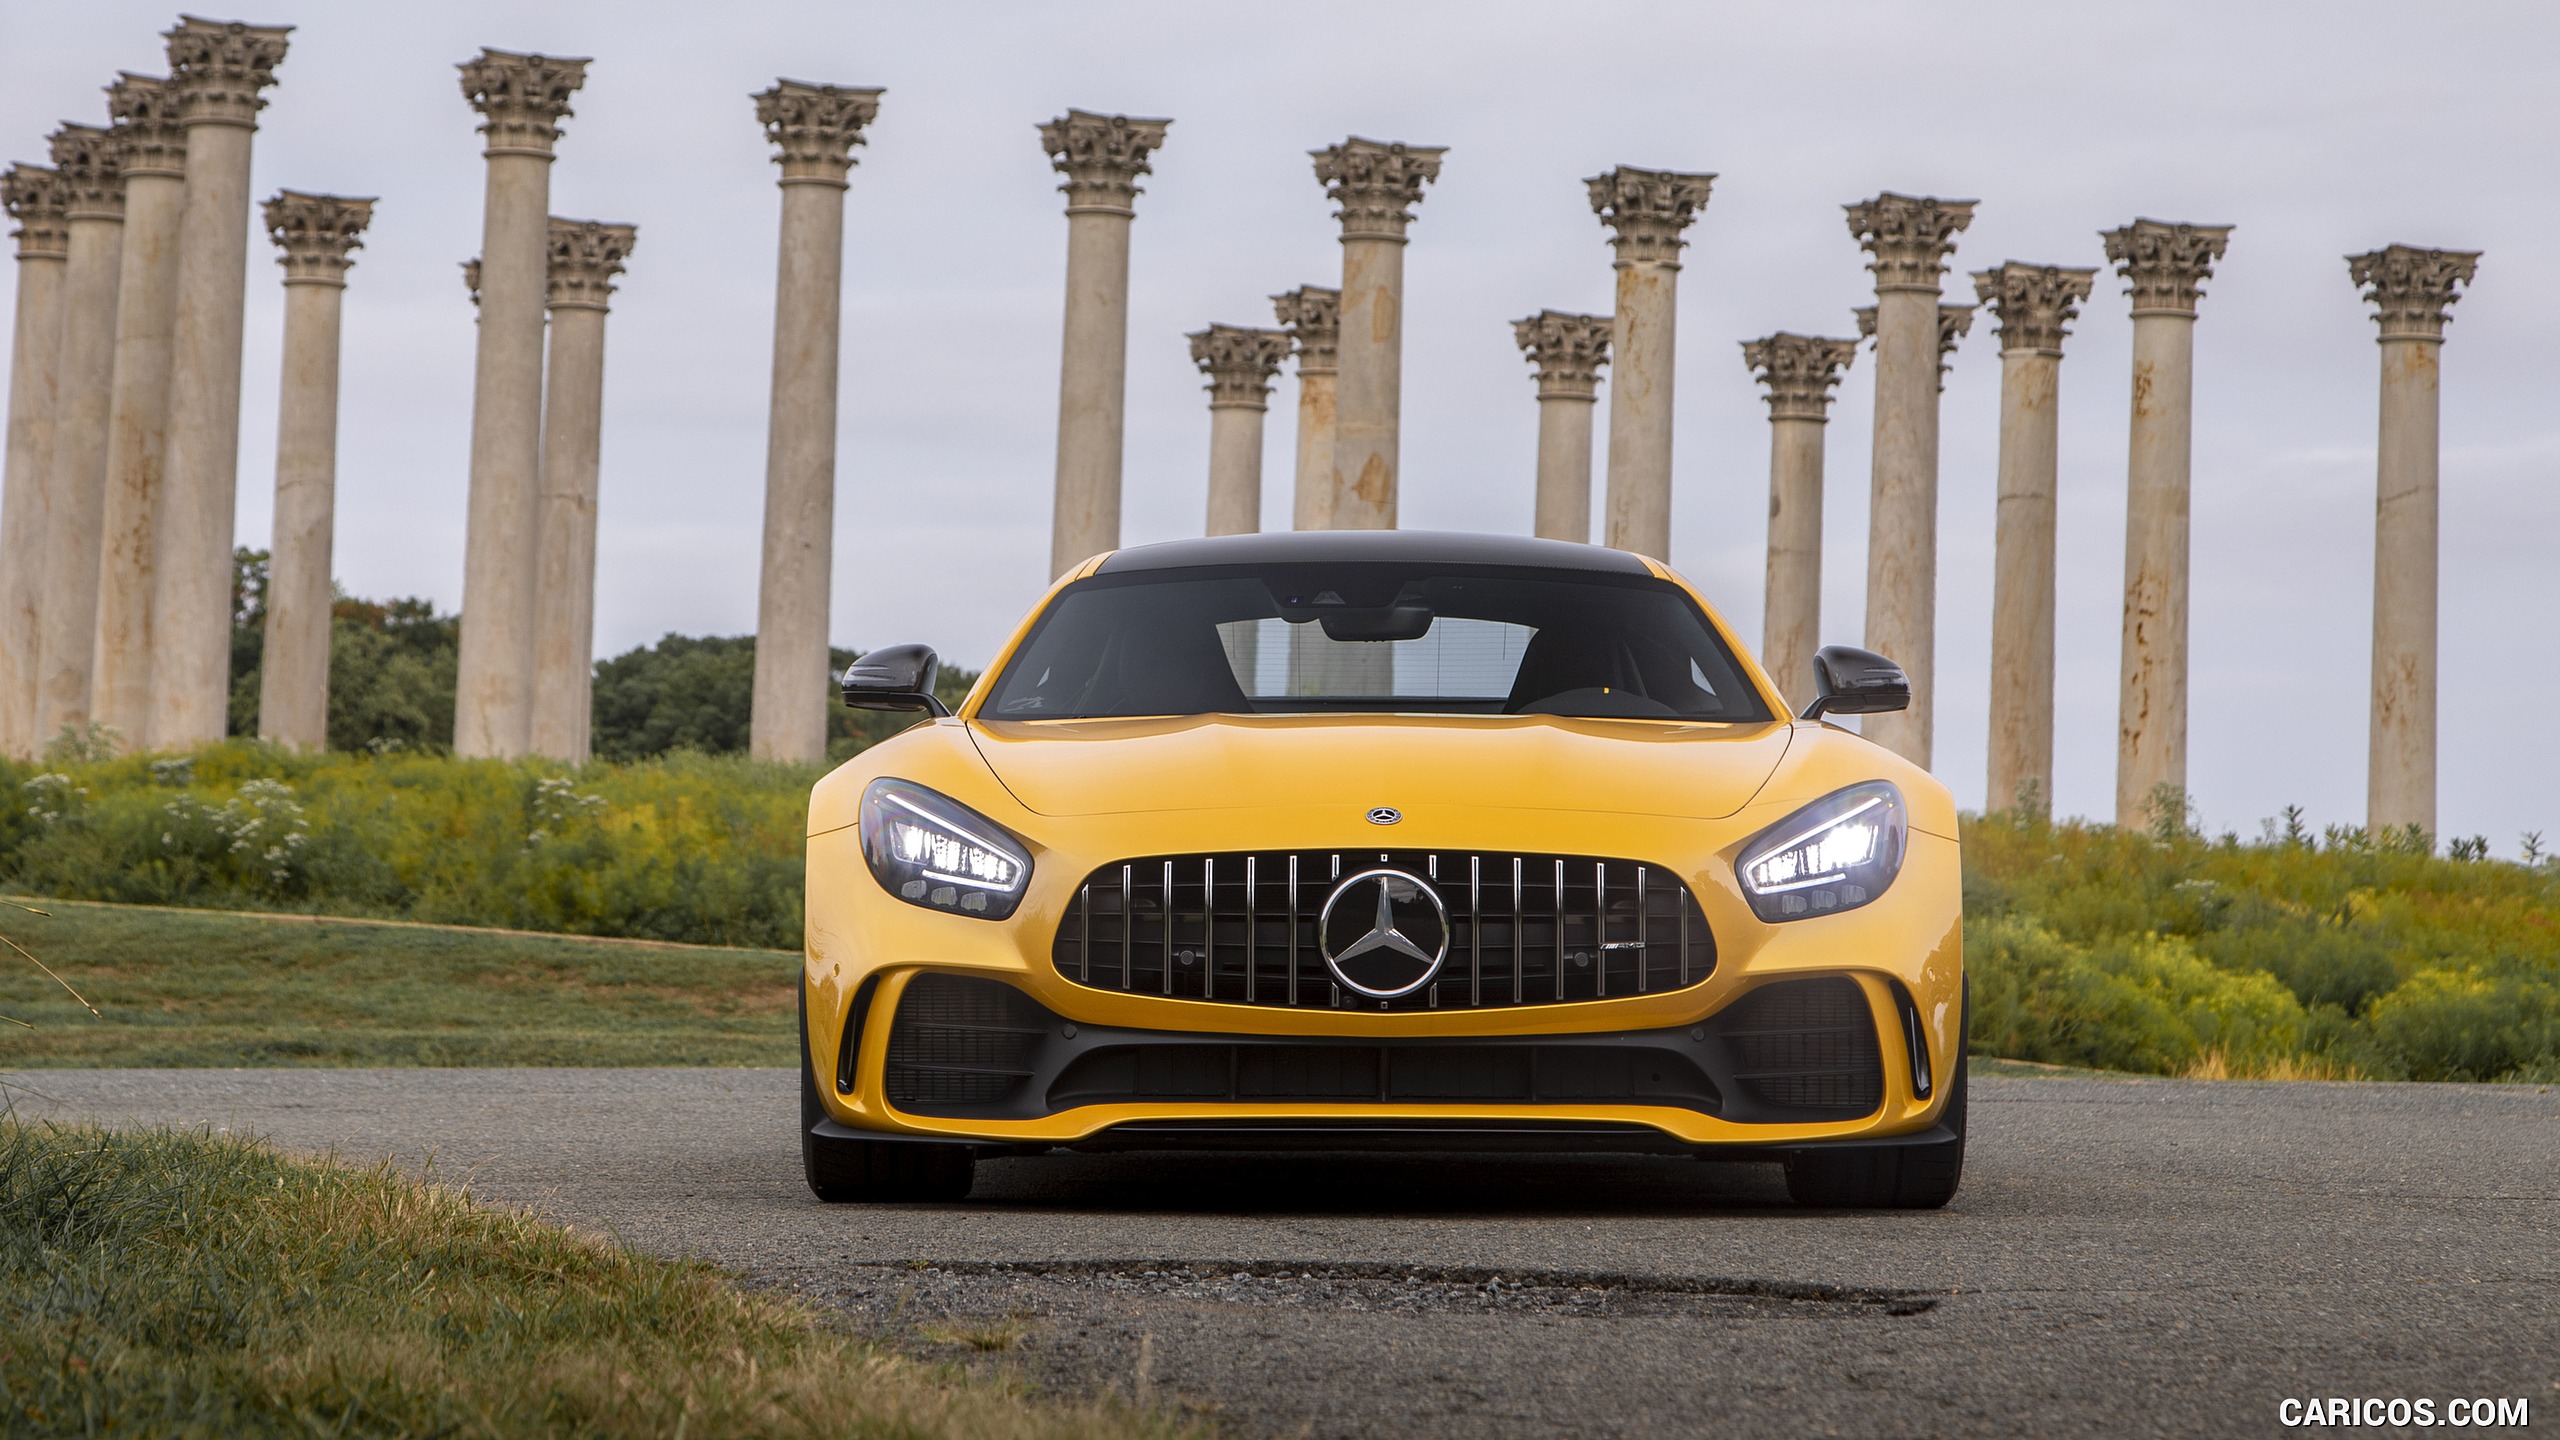 2020 Mercedes-AMG GT R Coupe (US-Spec) - Front, #278 of 328